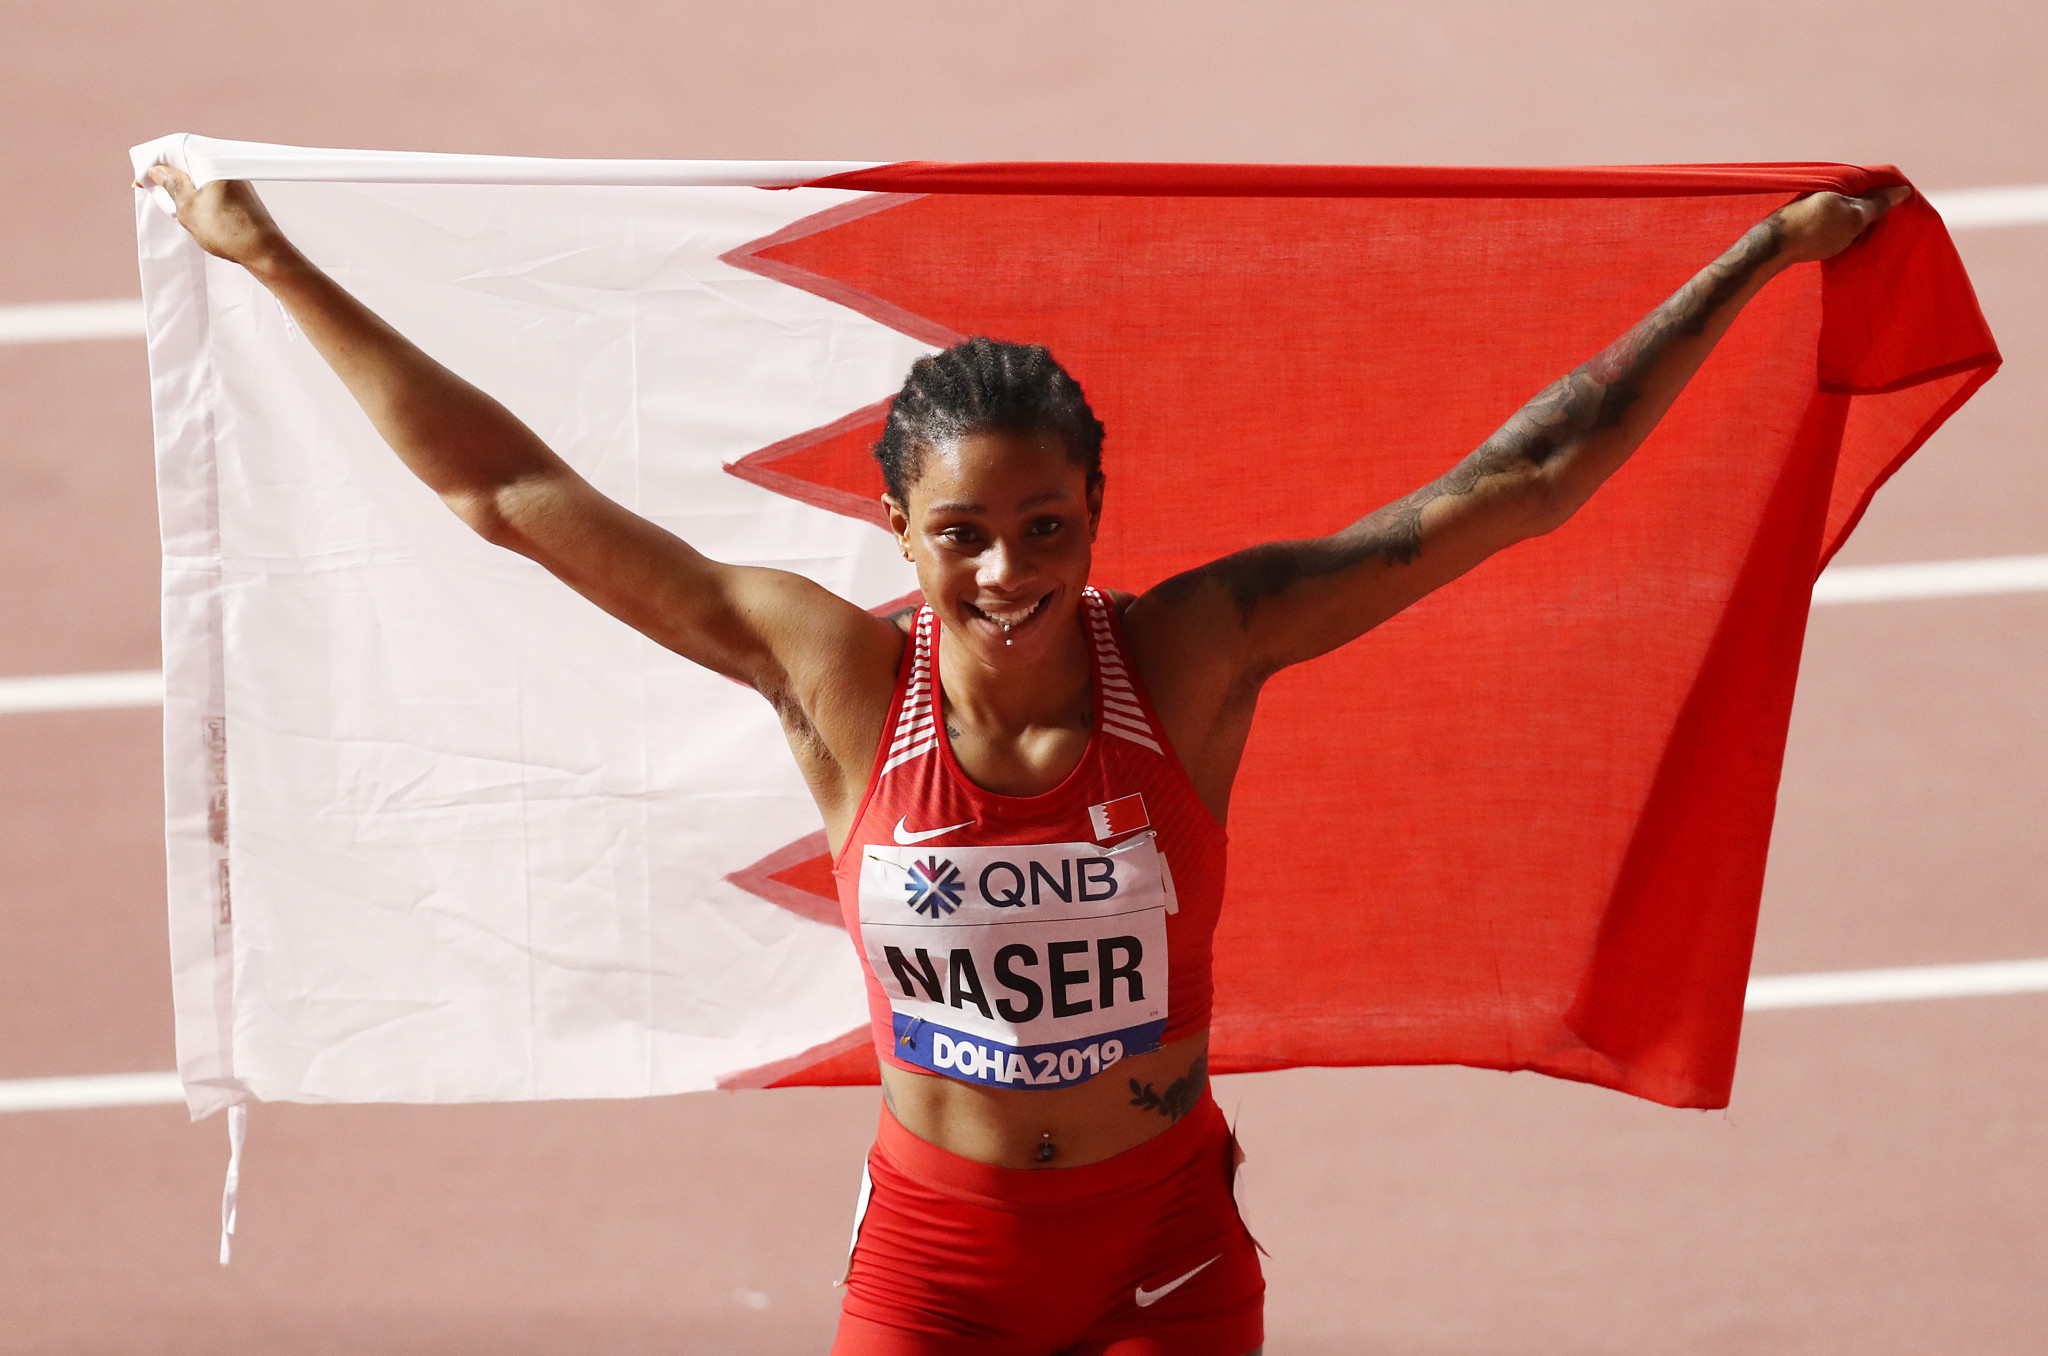 The decision by the World Athletics Disciplinary Tribunal not to uphold the Athletics Integrity Unit's proposed ban on Bahrain's world 400m champion Salwa Eid Naser has proved controversial ©Getty Images